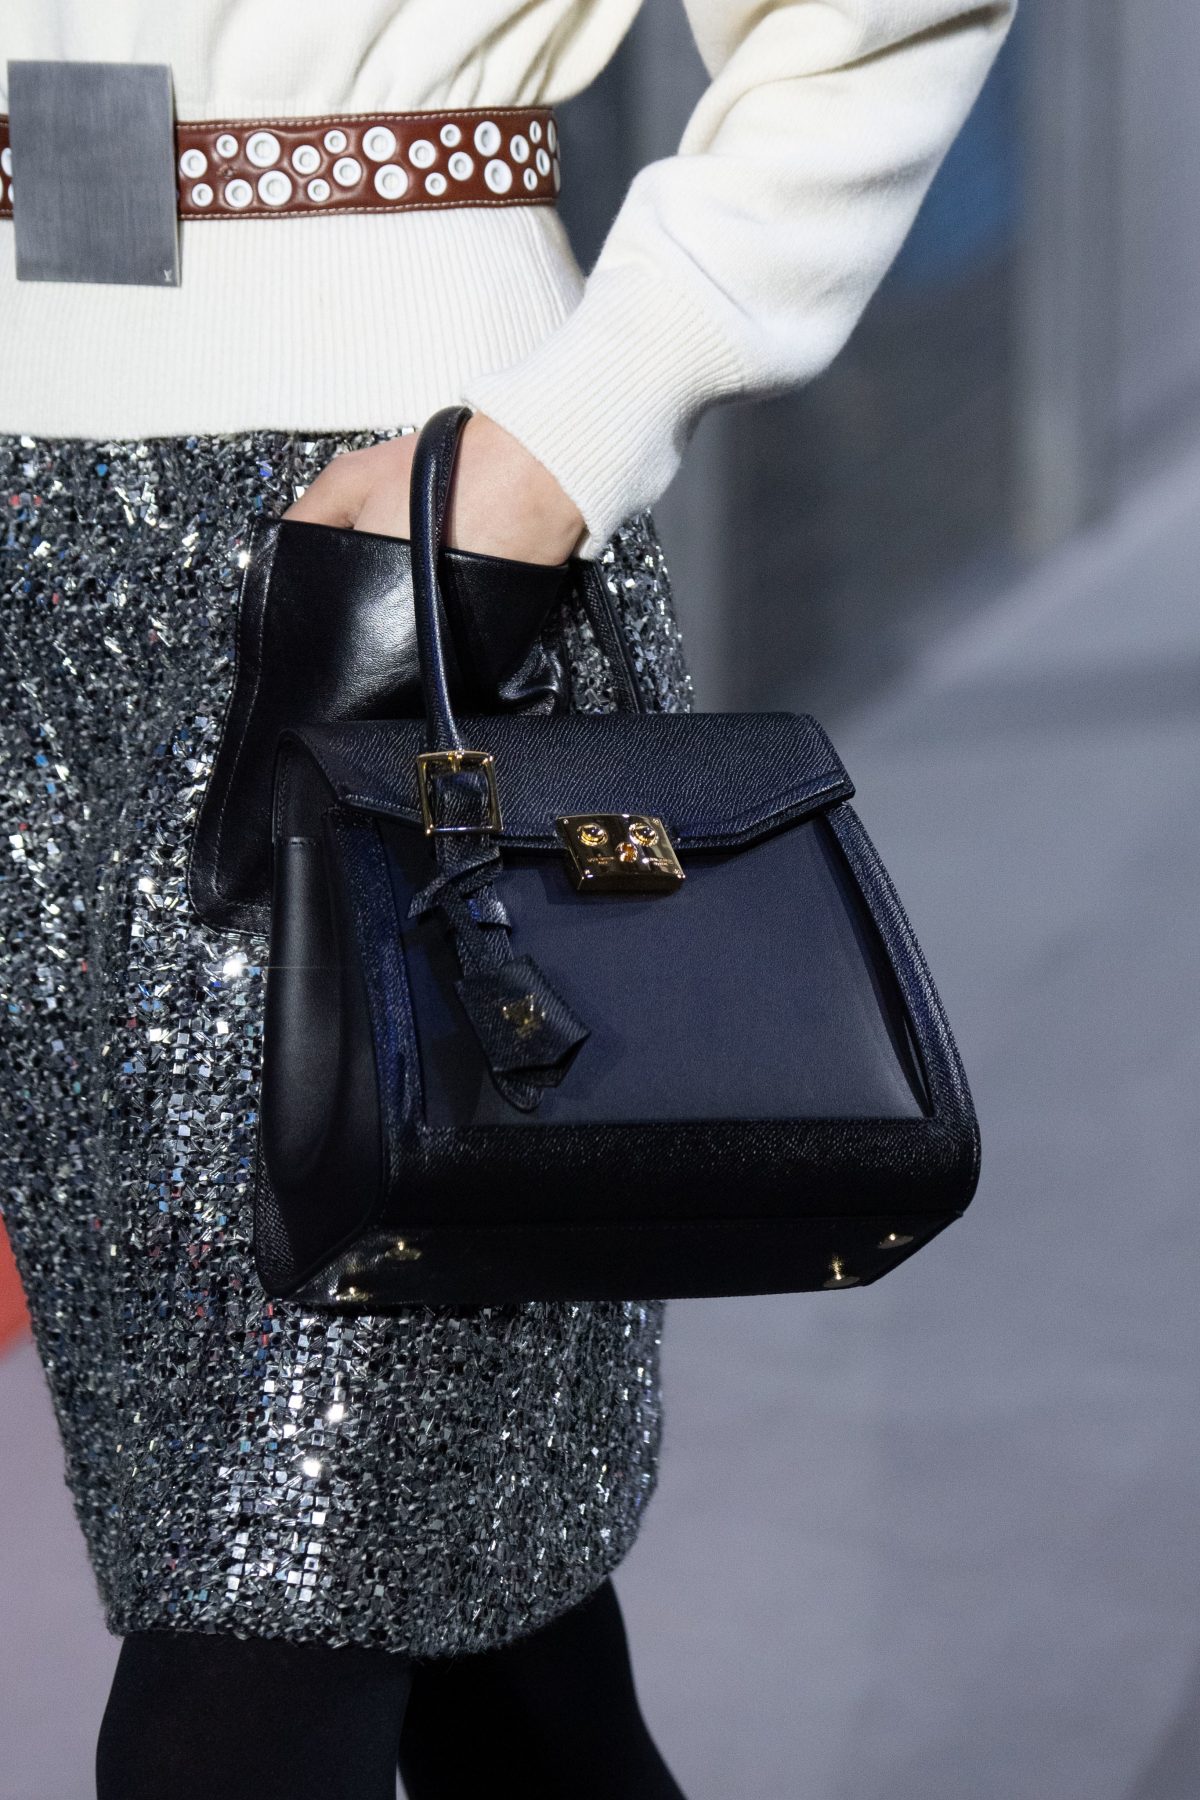 Louis Vuitton Fall/Winter 2019 Runway Bag Collection | Spotted Fashion